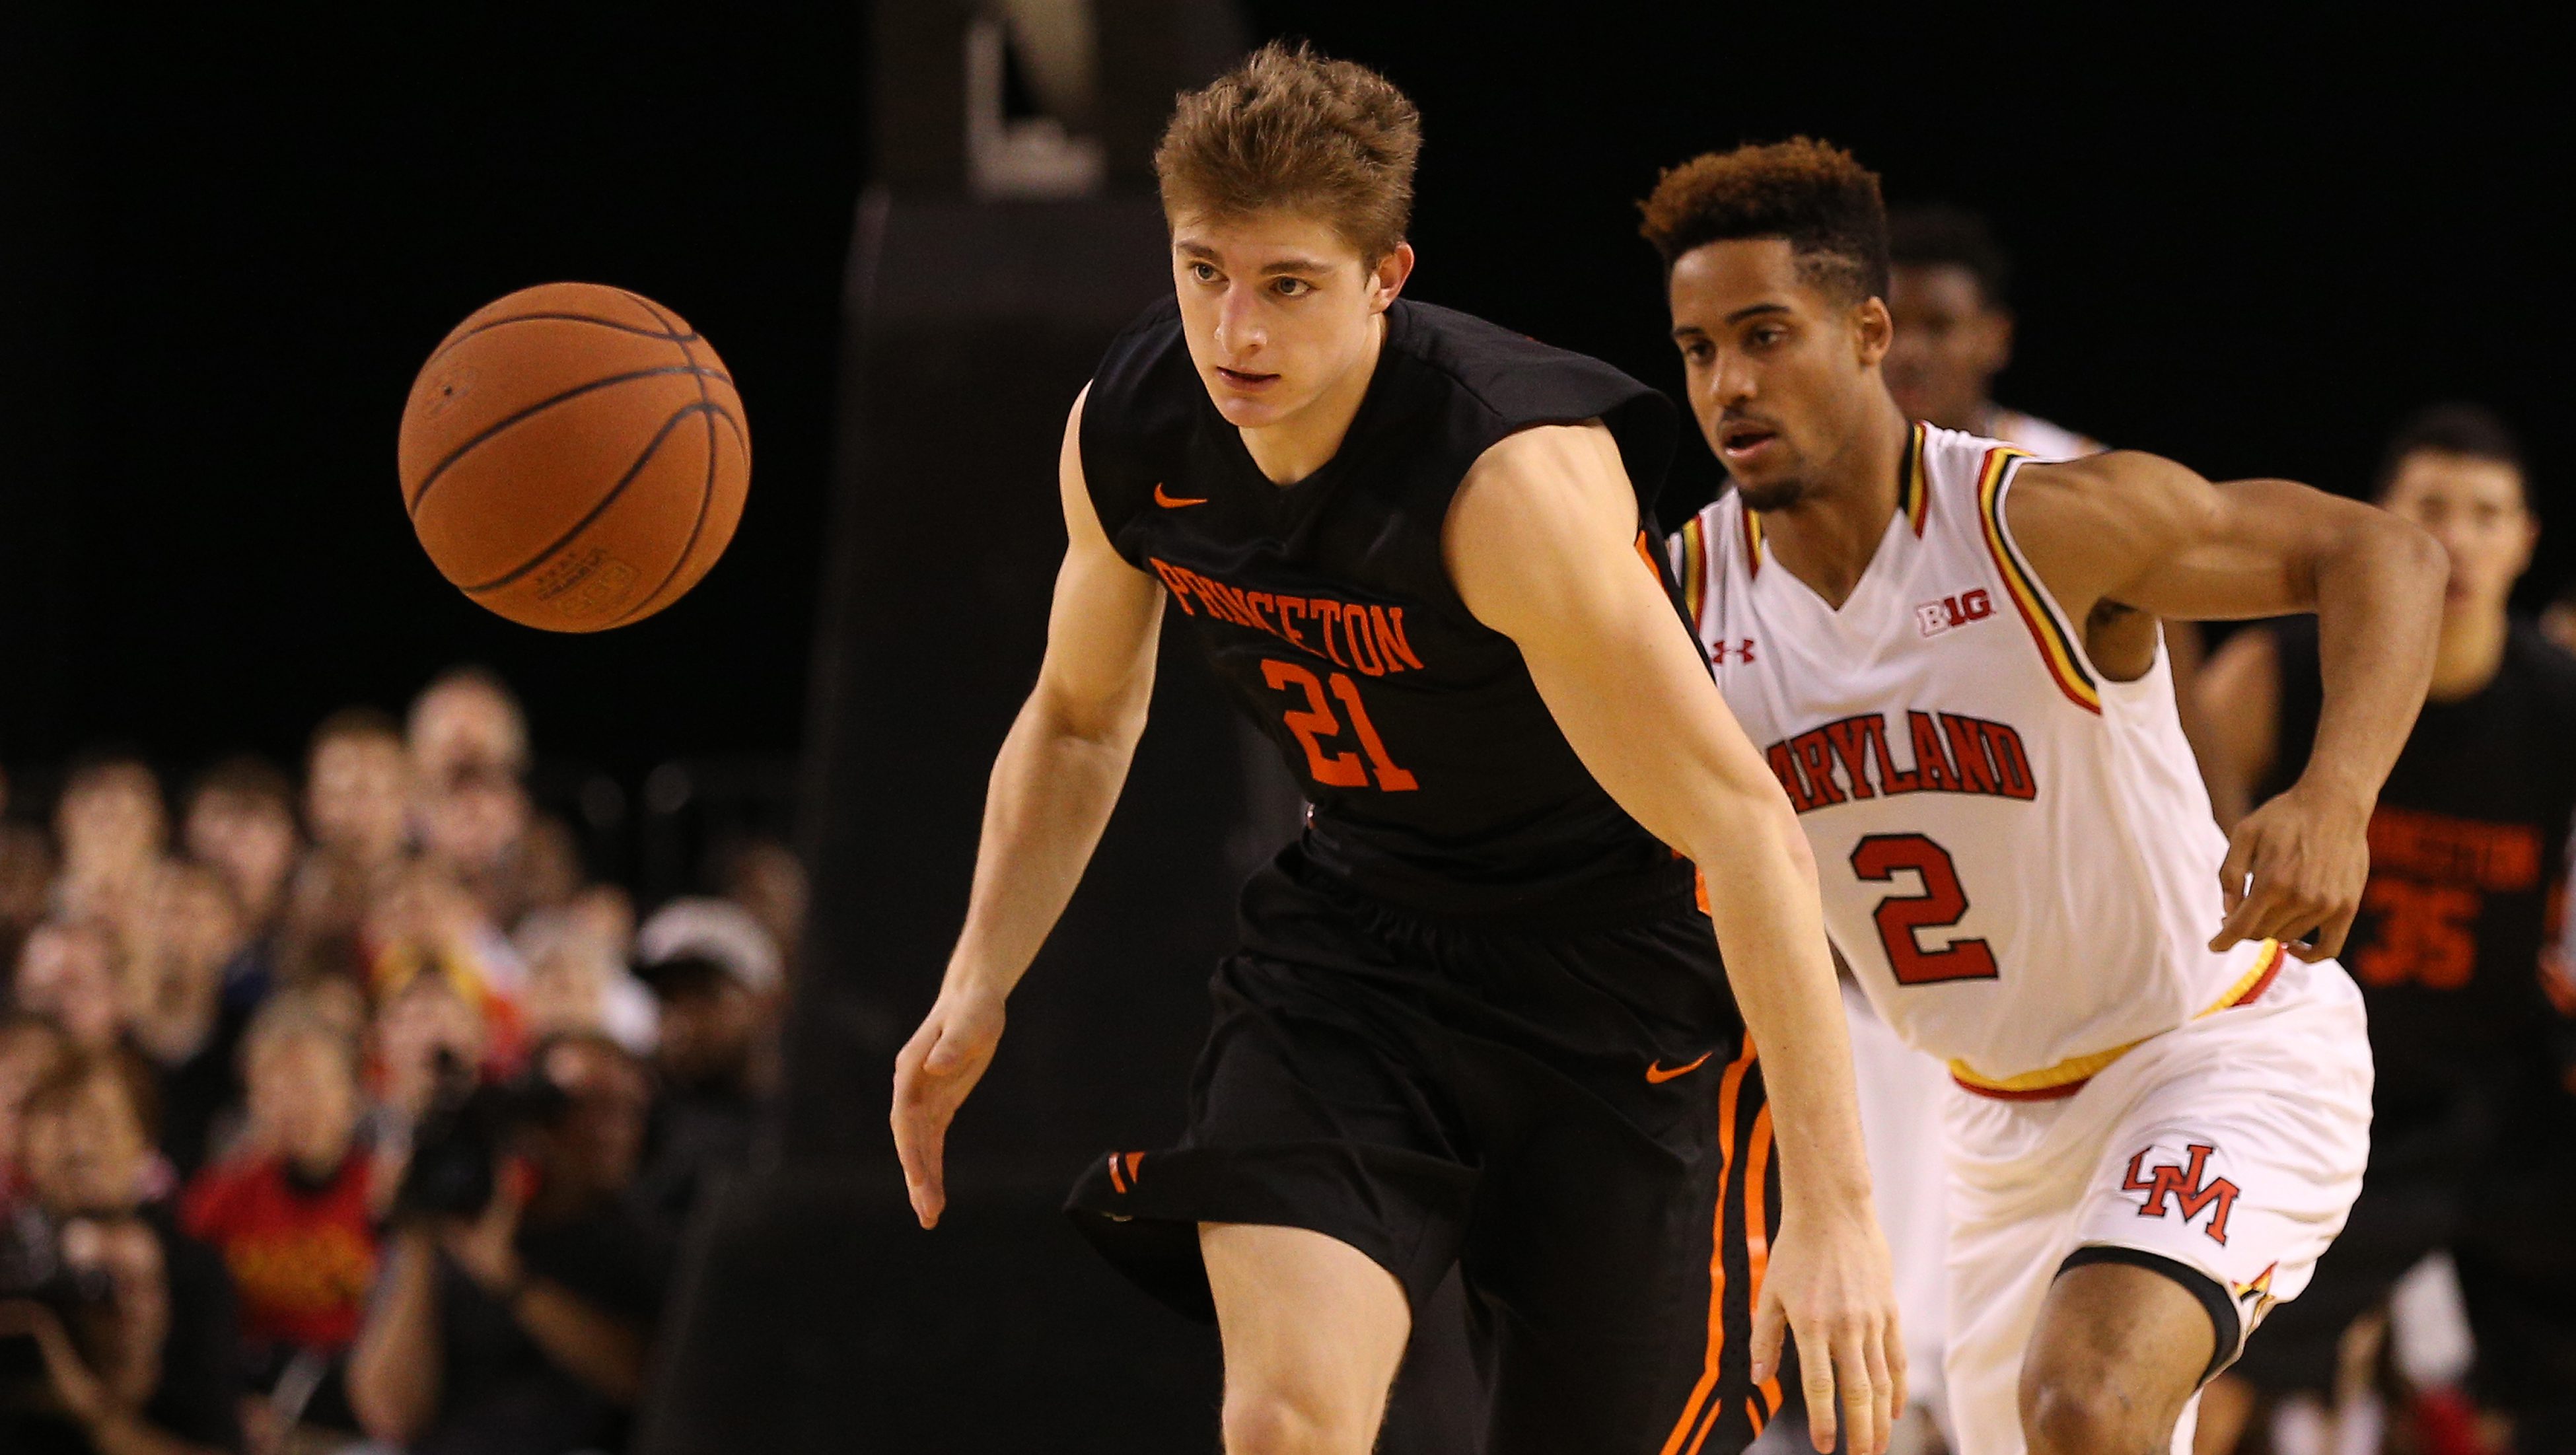 BALTIMORE, MD - DECEMBER 19: Henry Caruso #21 of the Princeton Tigers dribbles past Melo Trimble #2 of the Maryland Terrapins during the second half at Royal Farms Arena on December 19, 2015 in Baltimore, Maryland. The Maryland Terrapins won, 82-61.(Photo by Patrick Smith/Getty Images)